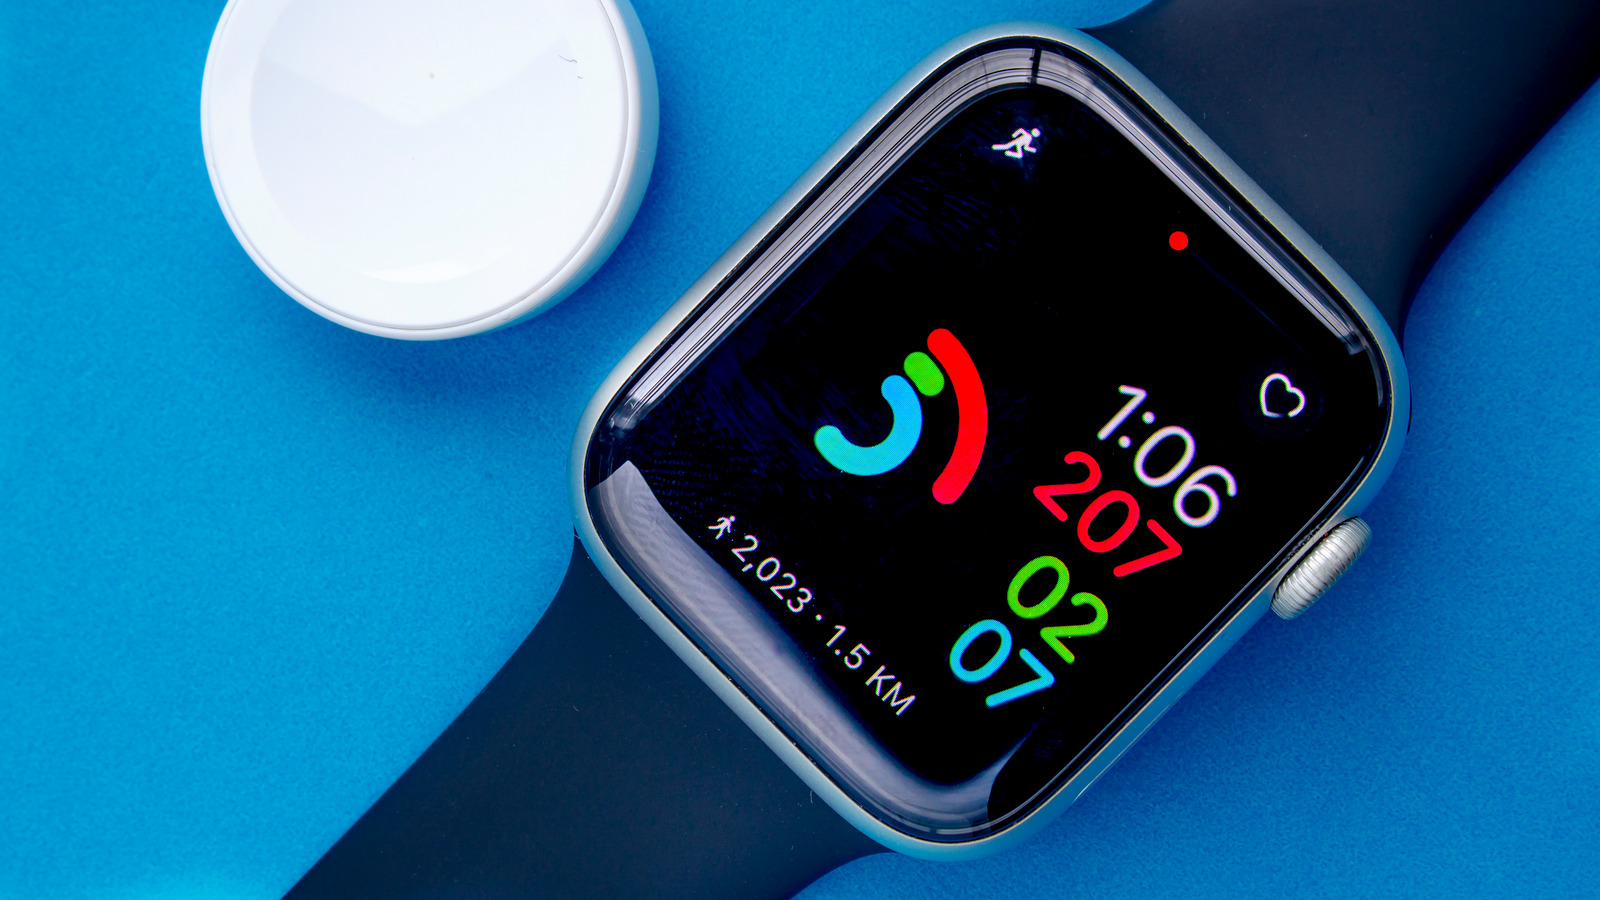 AI Accurately Detects LV Dysfunction Using Single-Lead Apple Watch ECG